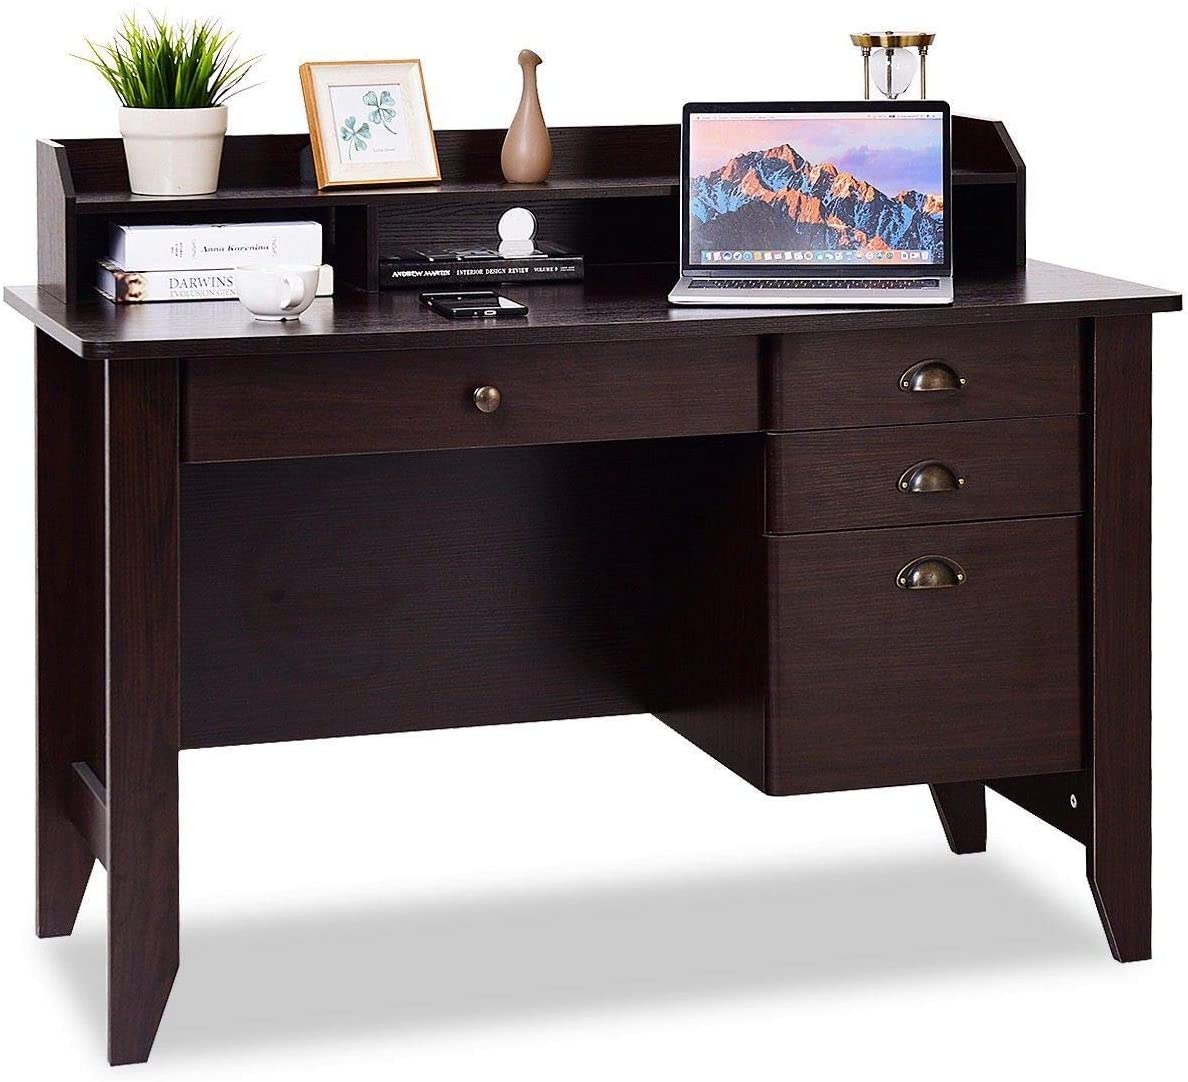 Tangkula Computer Desk, Home Office Desk, Wood Frame Vintage Style Student Table with 4 Drawers & Bookshelf, PC Laptop Notebook Desk, Spacious Workstation Writing Study Table (Brown)